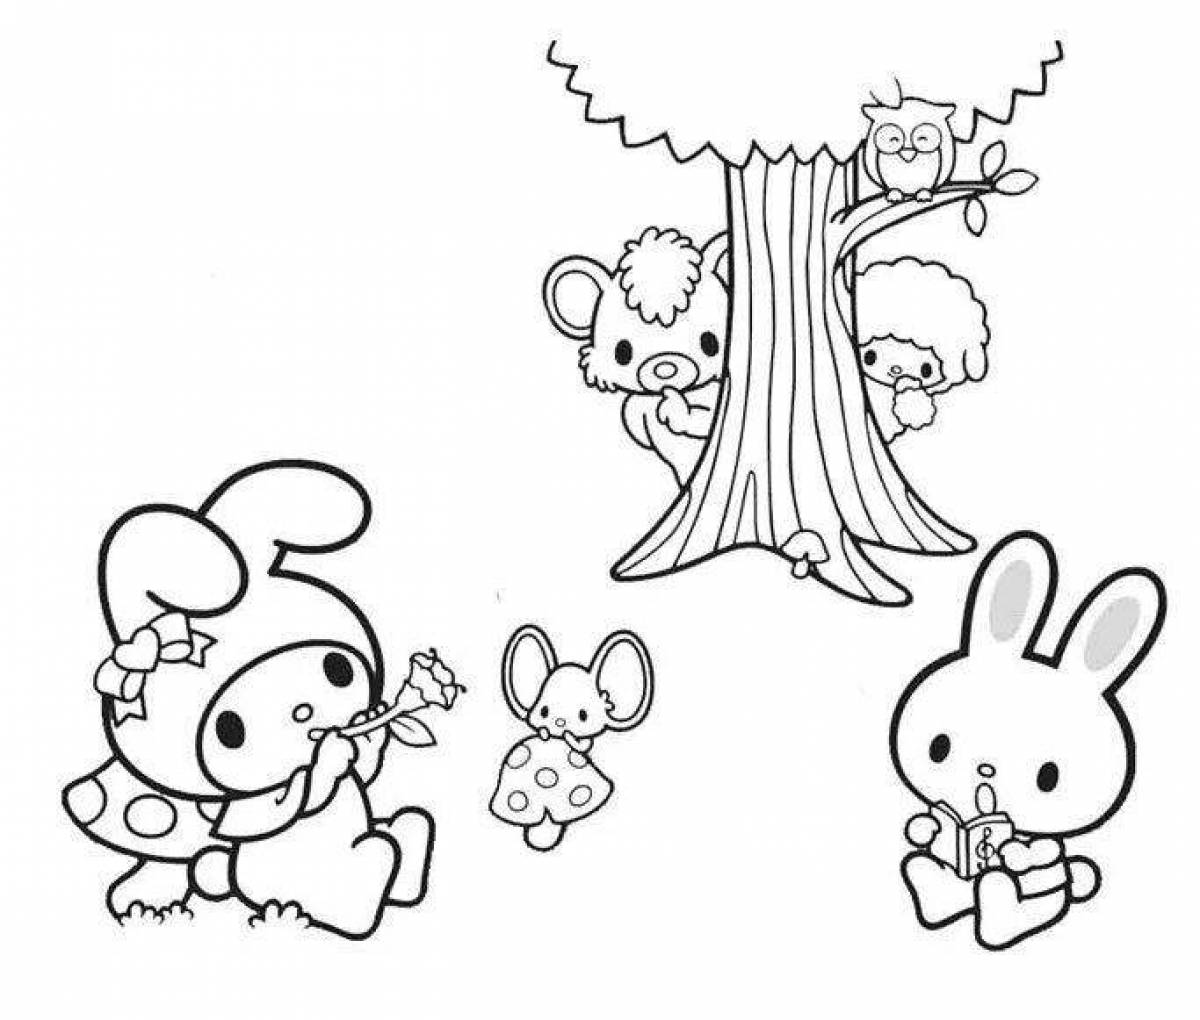 Immaculate keroppi coloring page